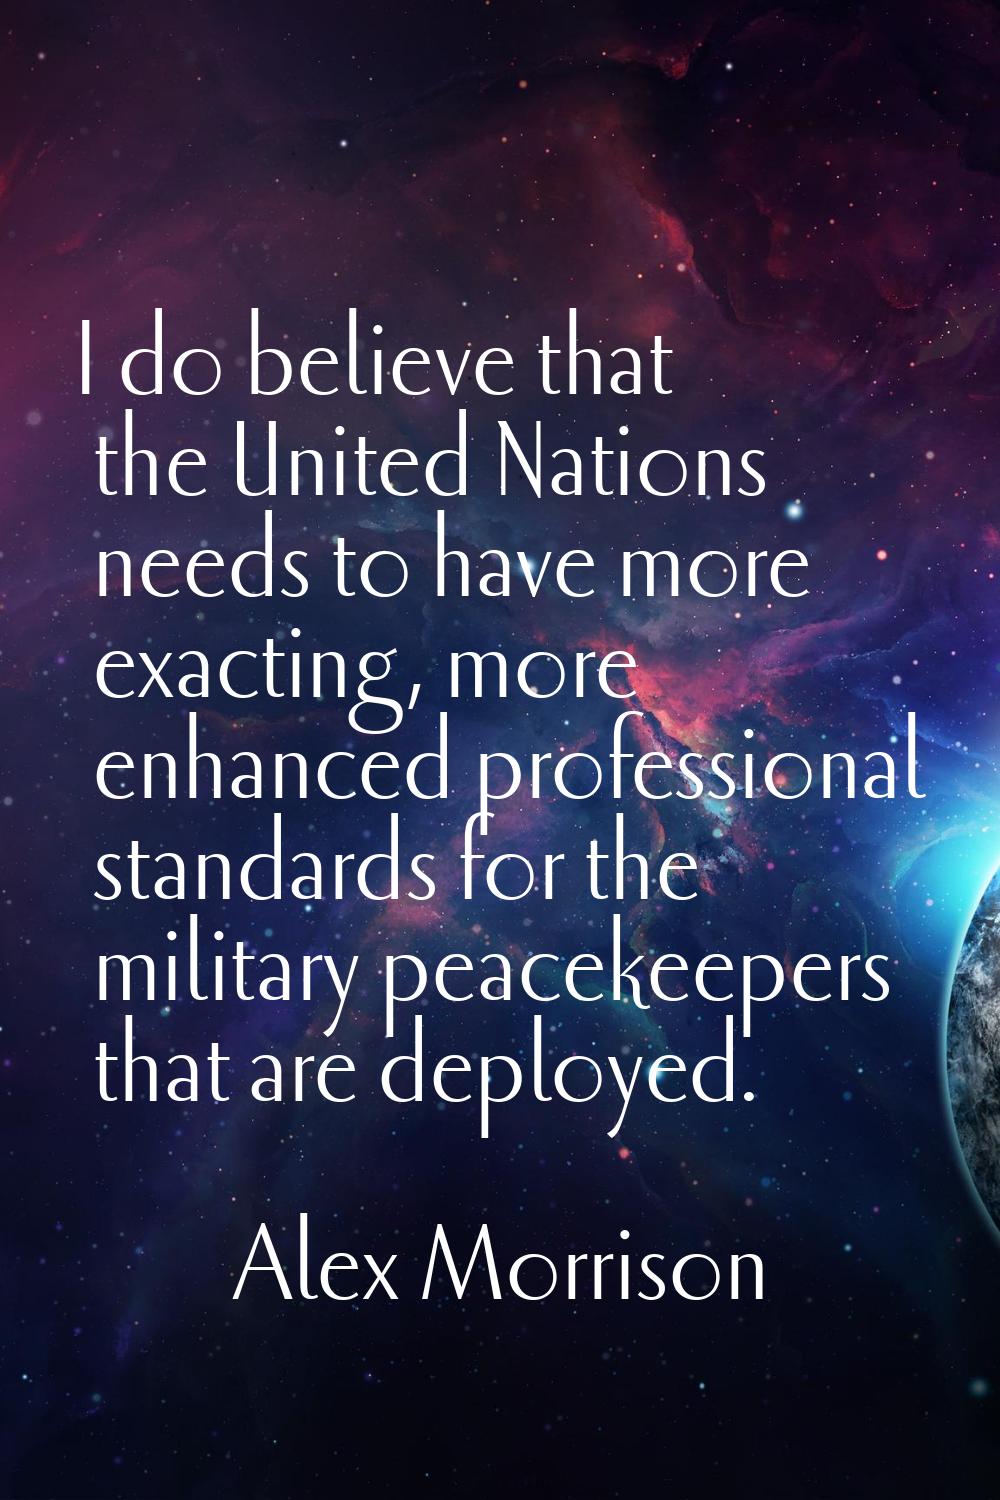 I do believe that the United Nations needs to have more exacting, more enhanced professional standa